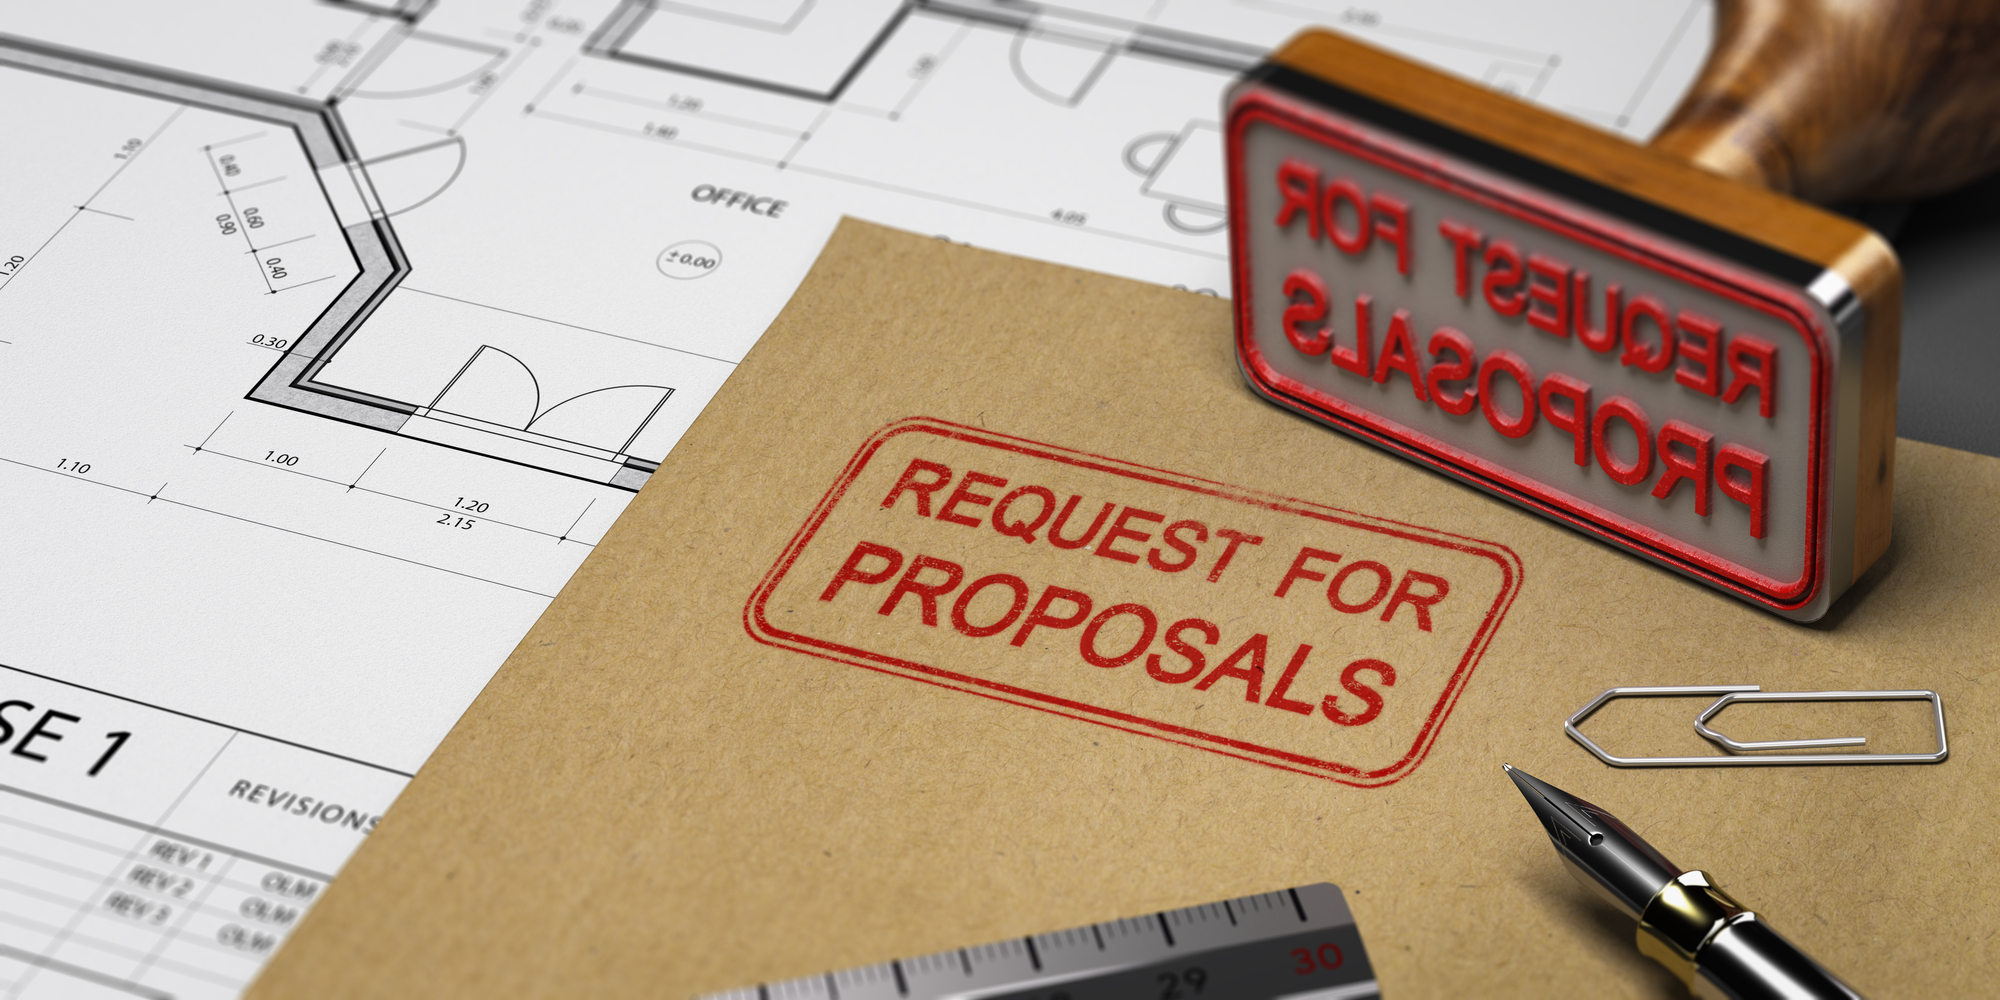 Request For Proposal Stamped On Folder and Construction Plans for Finding Qualified Third Bidders Blog Post